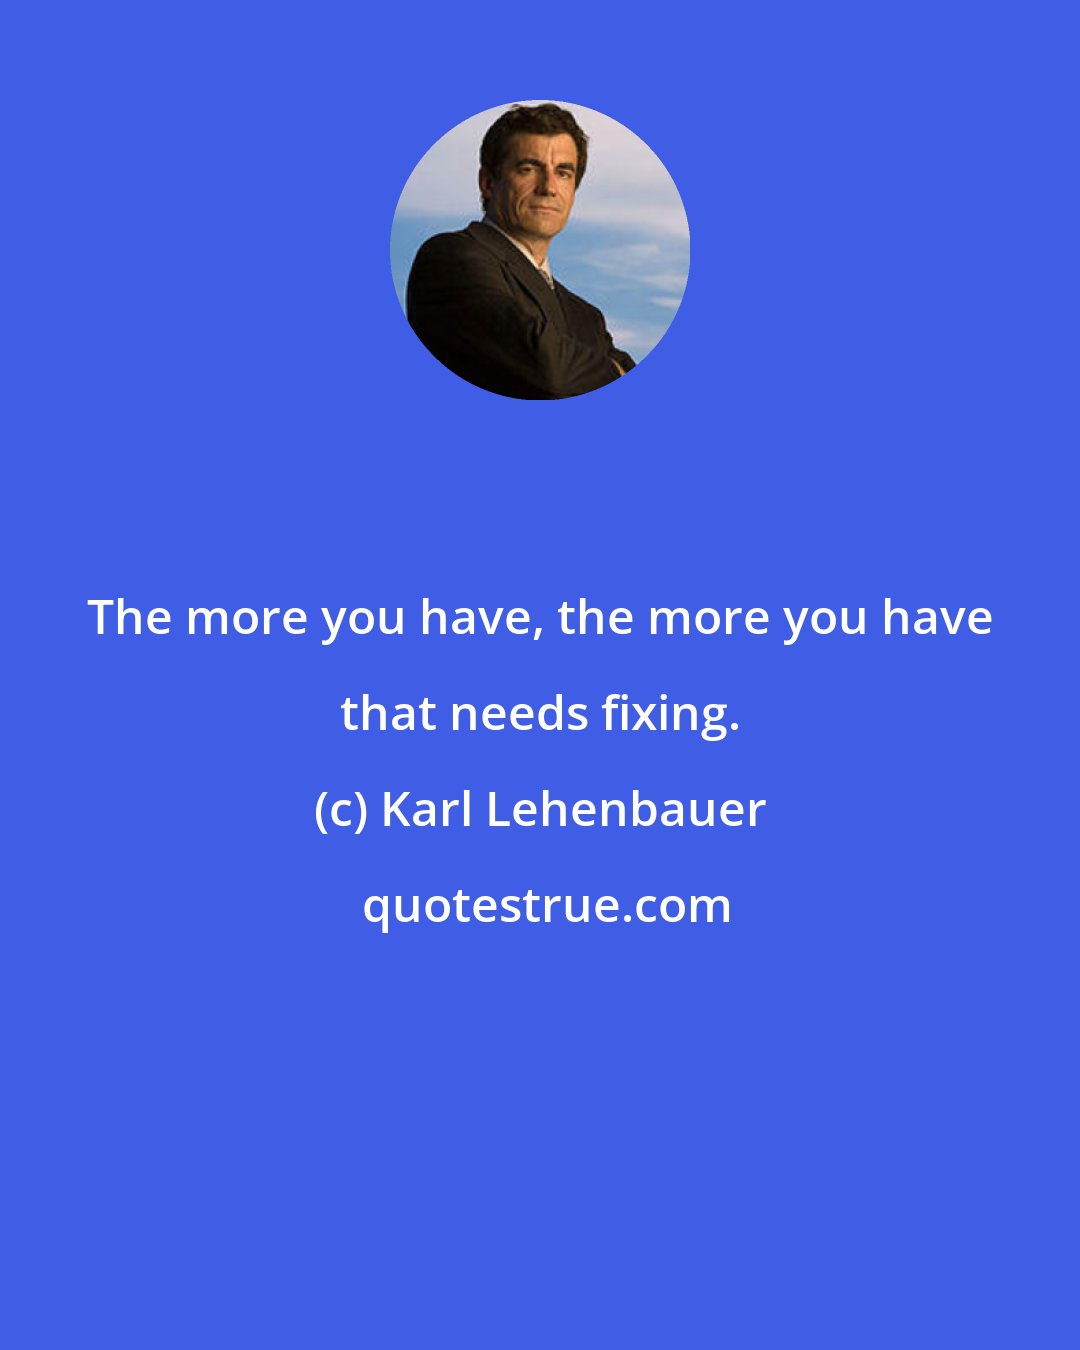 Karl Lehenbauer: The more you have, the more you have that needs fixing.